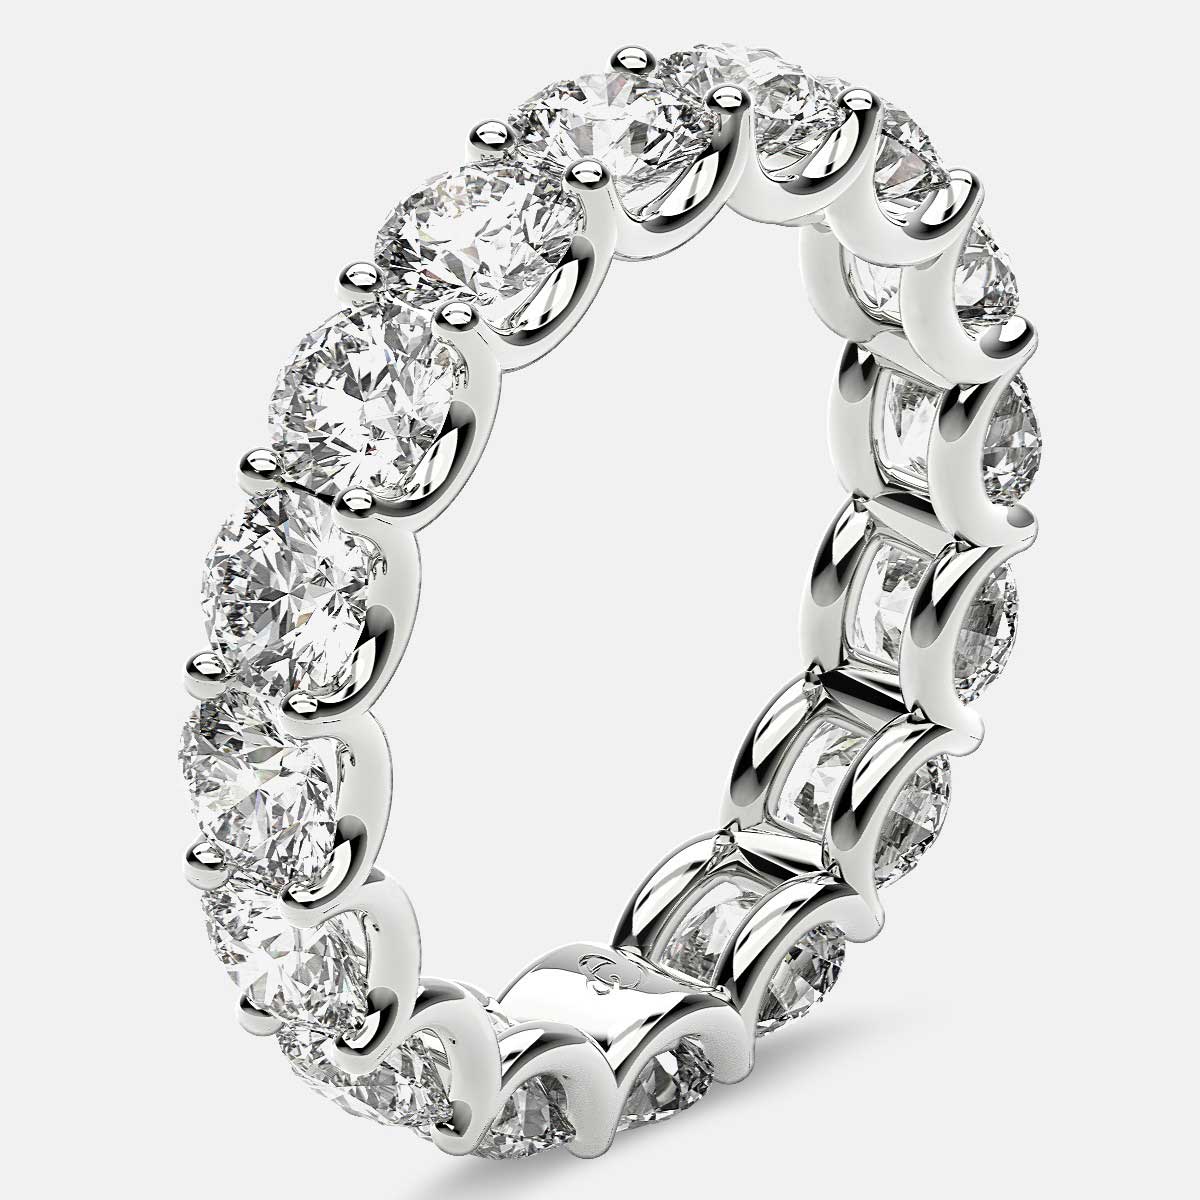 Eternity Ring with Arch Prong Set Round Diamonds in Platinum